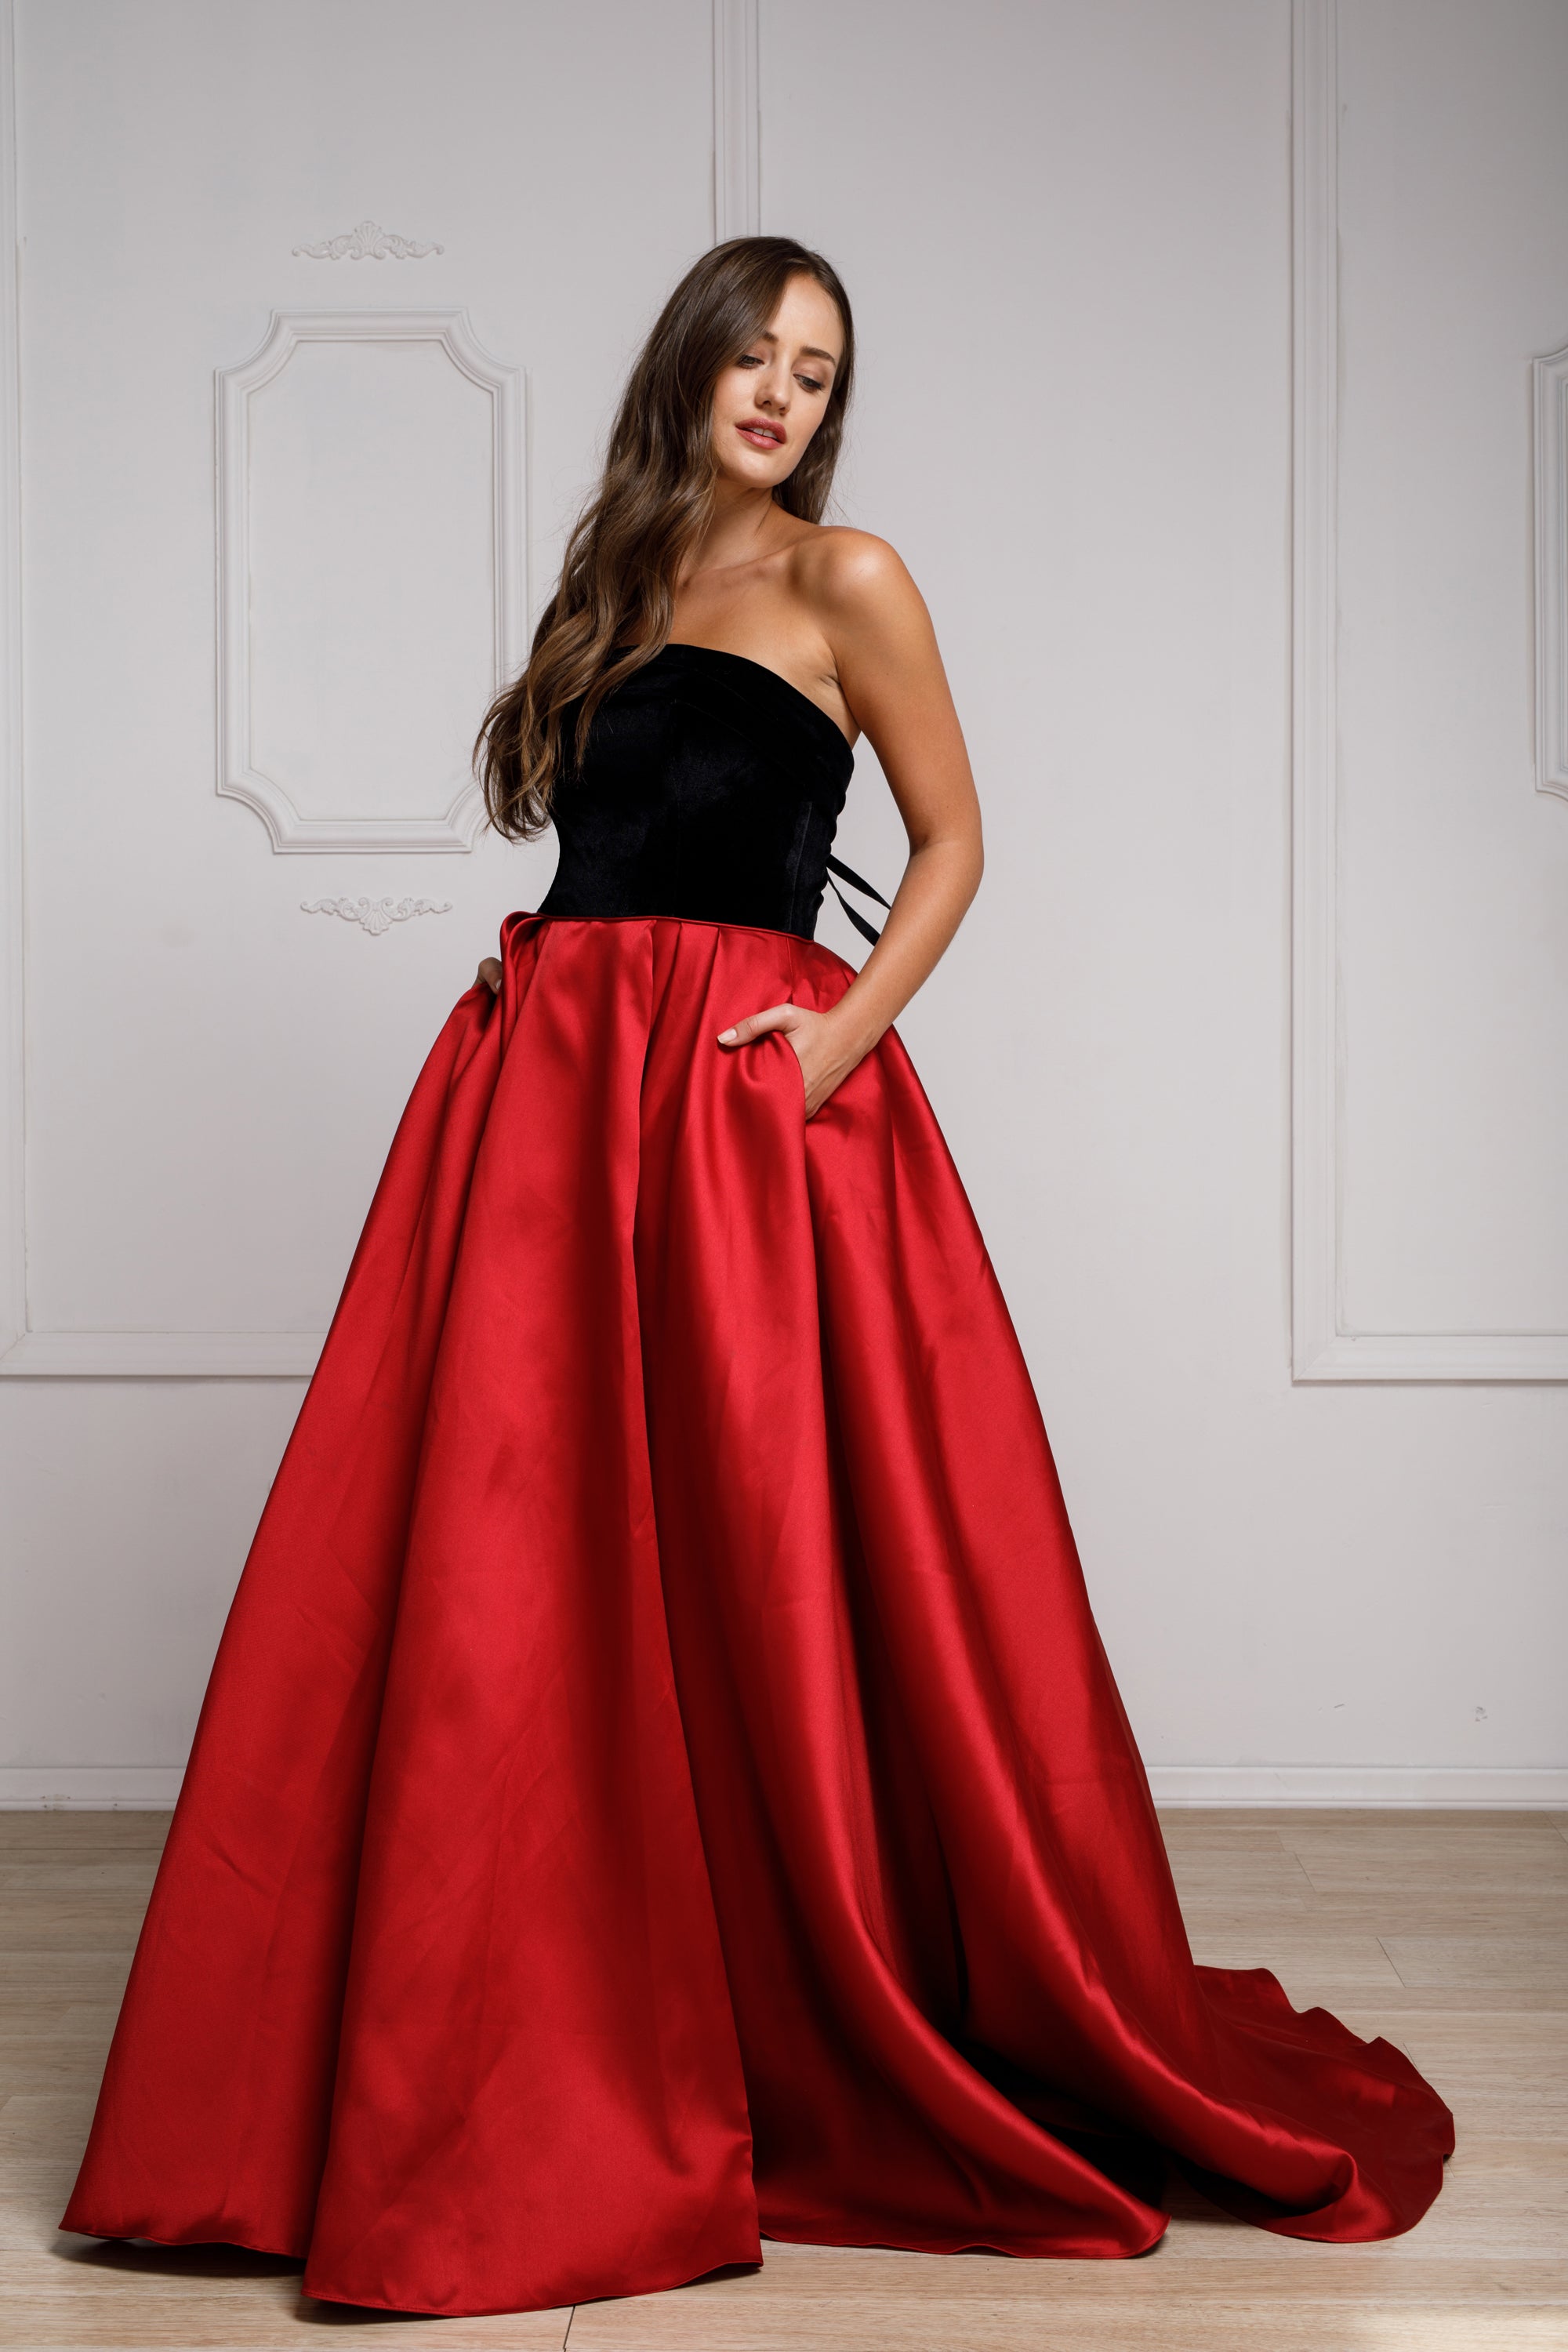 Main image of Off Shoulder Long Puffy Prom Dress